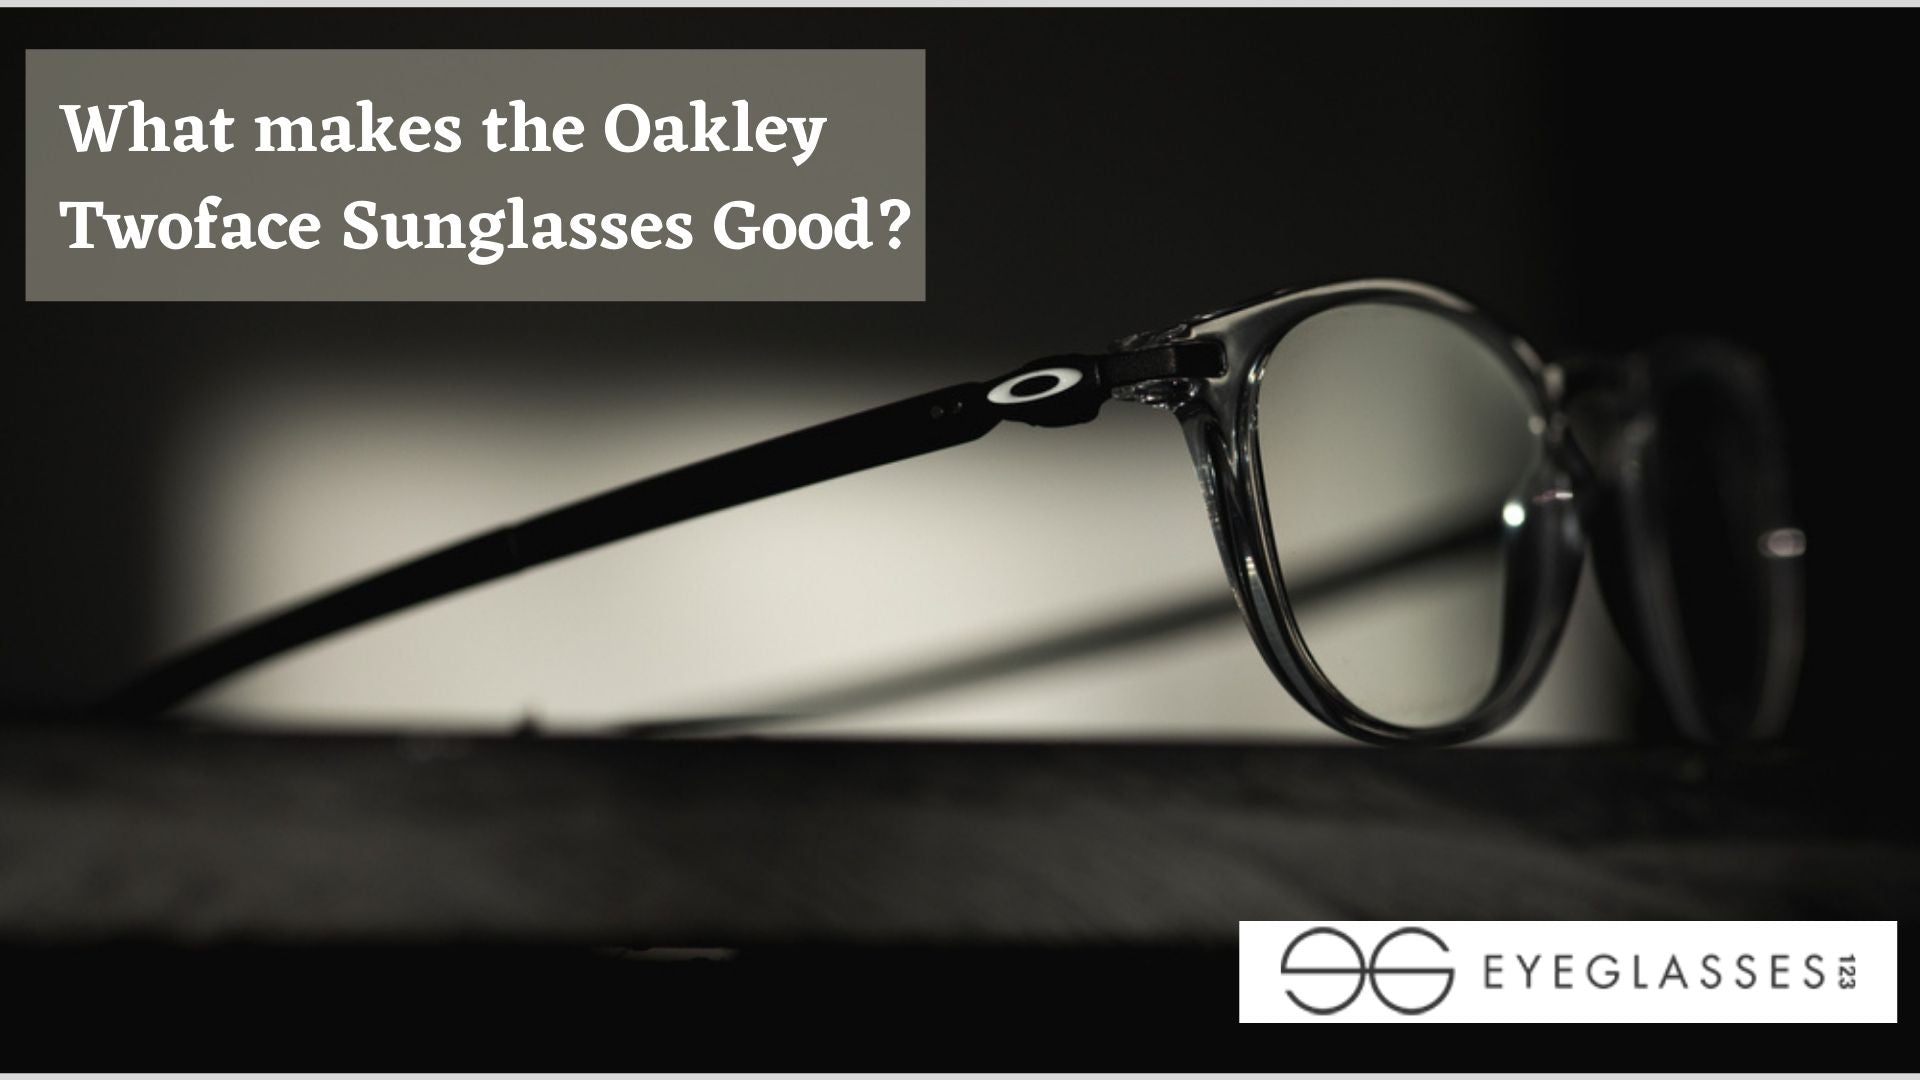 What makes the Oakley Twoface Sunglasses Good?